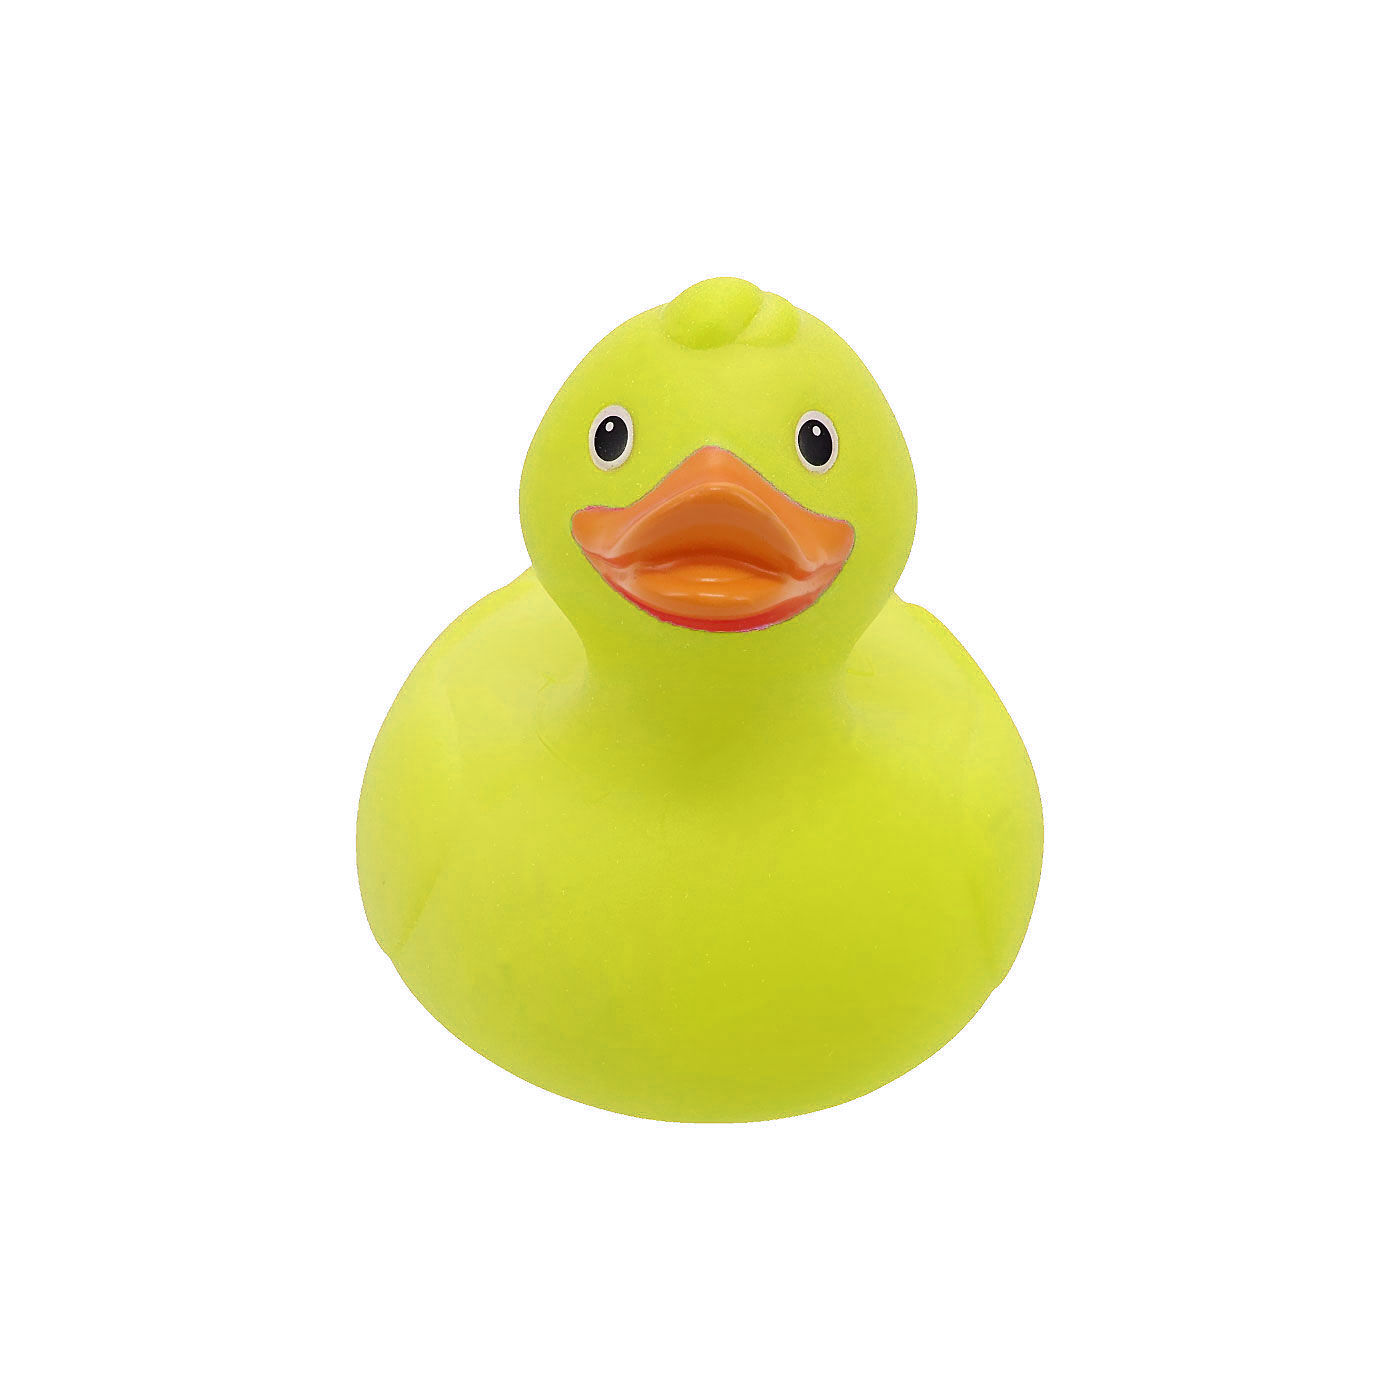 Classic yellow rubber ducky (10 cm)